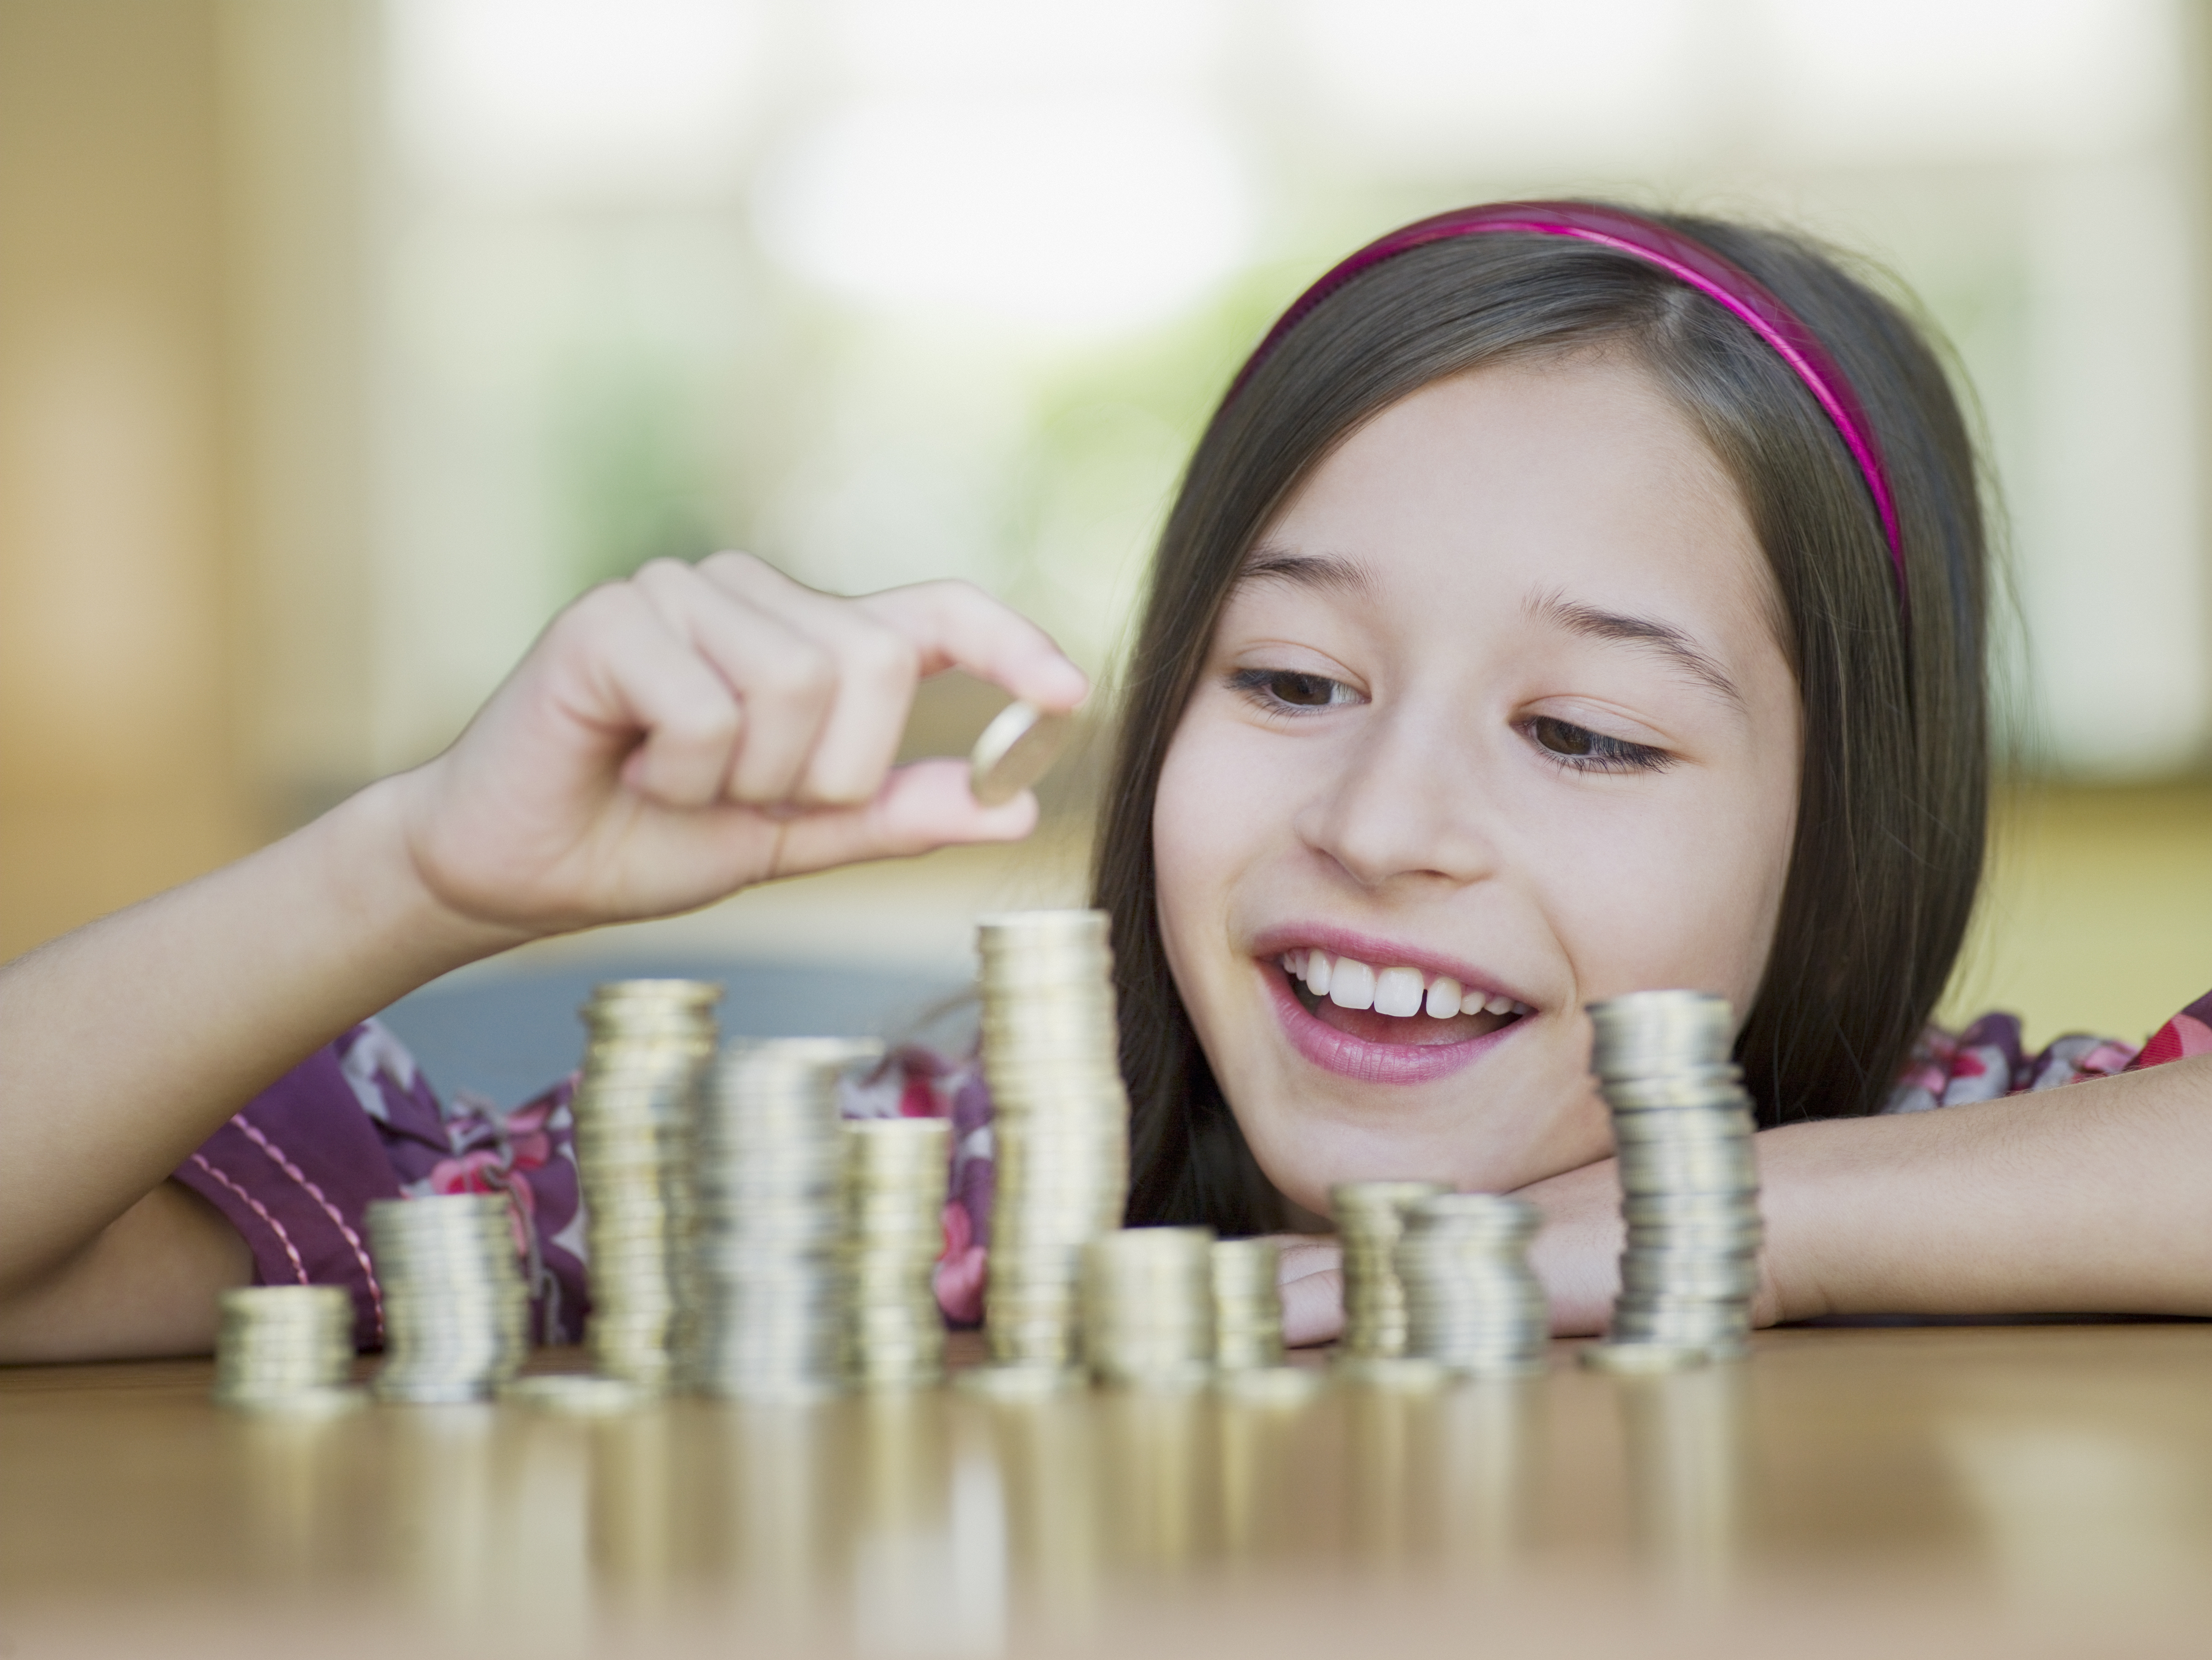 A young child with long hair rests their forearms on a table with piles of different coins. The piles are different sizes, and the child is smiling while placing a coin at the top of the highest pile.